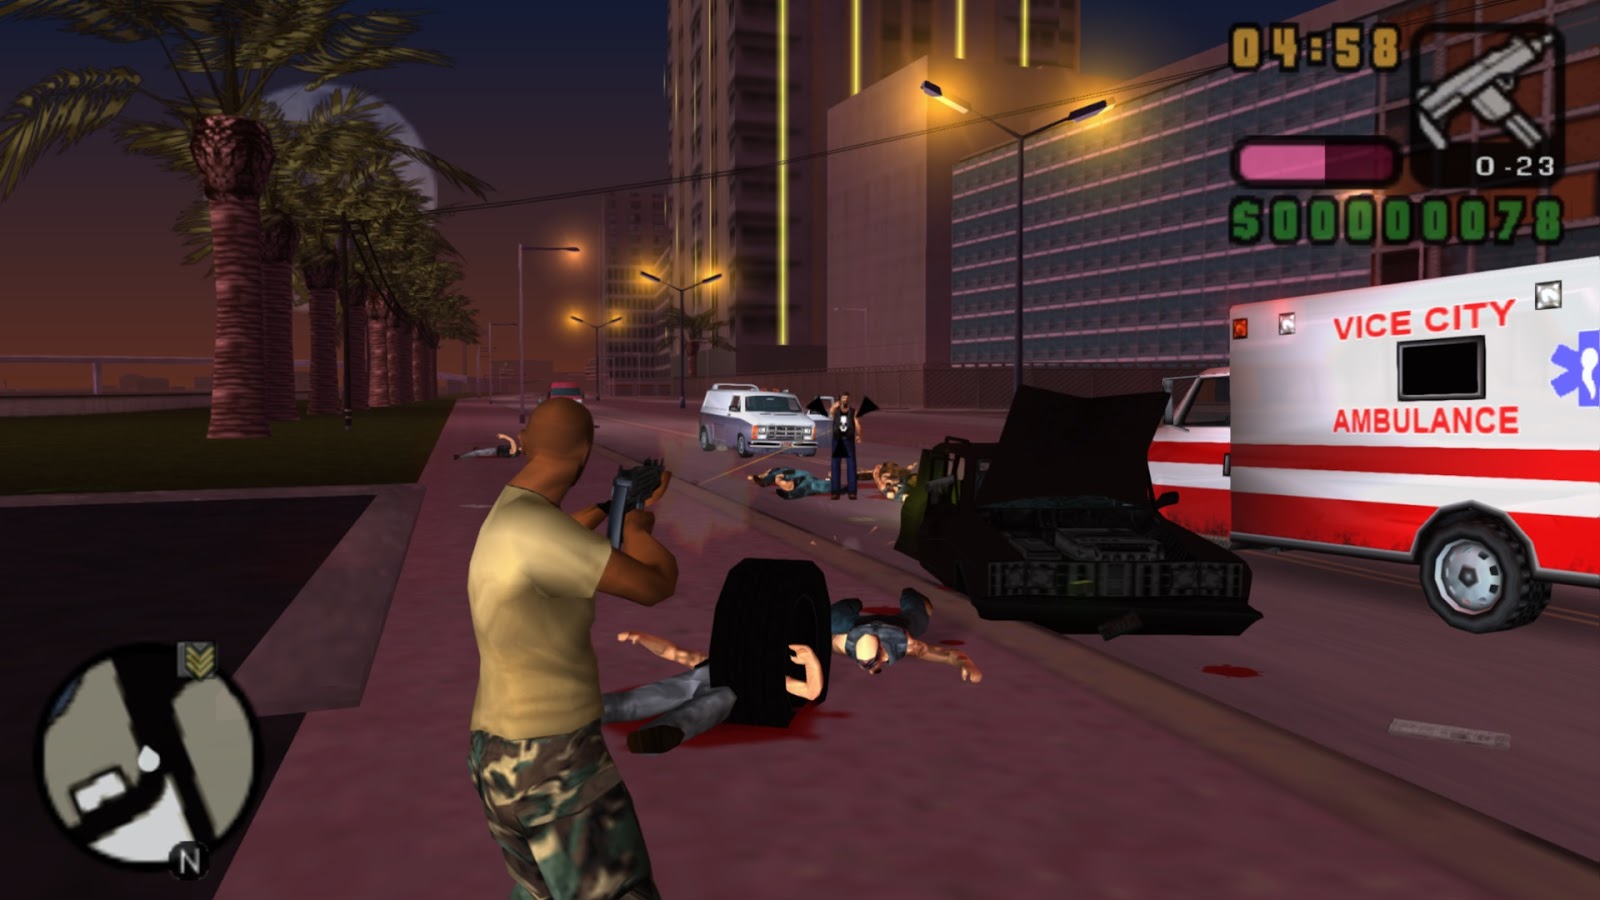 Gta grand theft auto vice city game download for android highly compressed